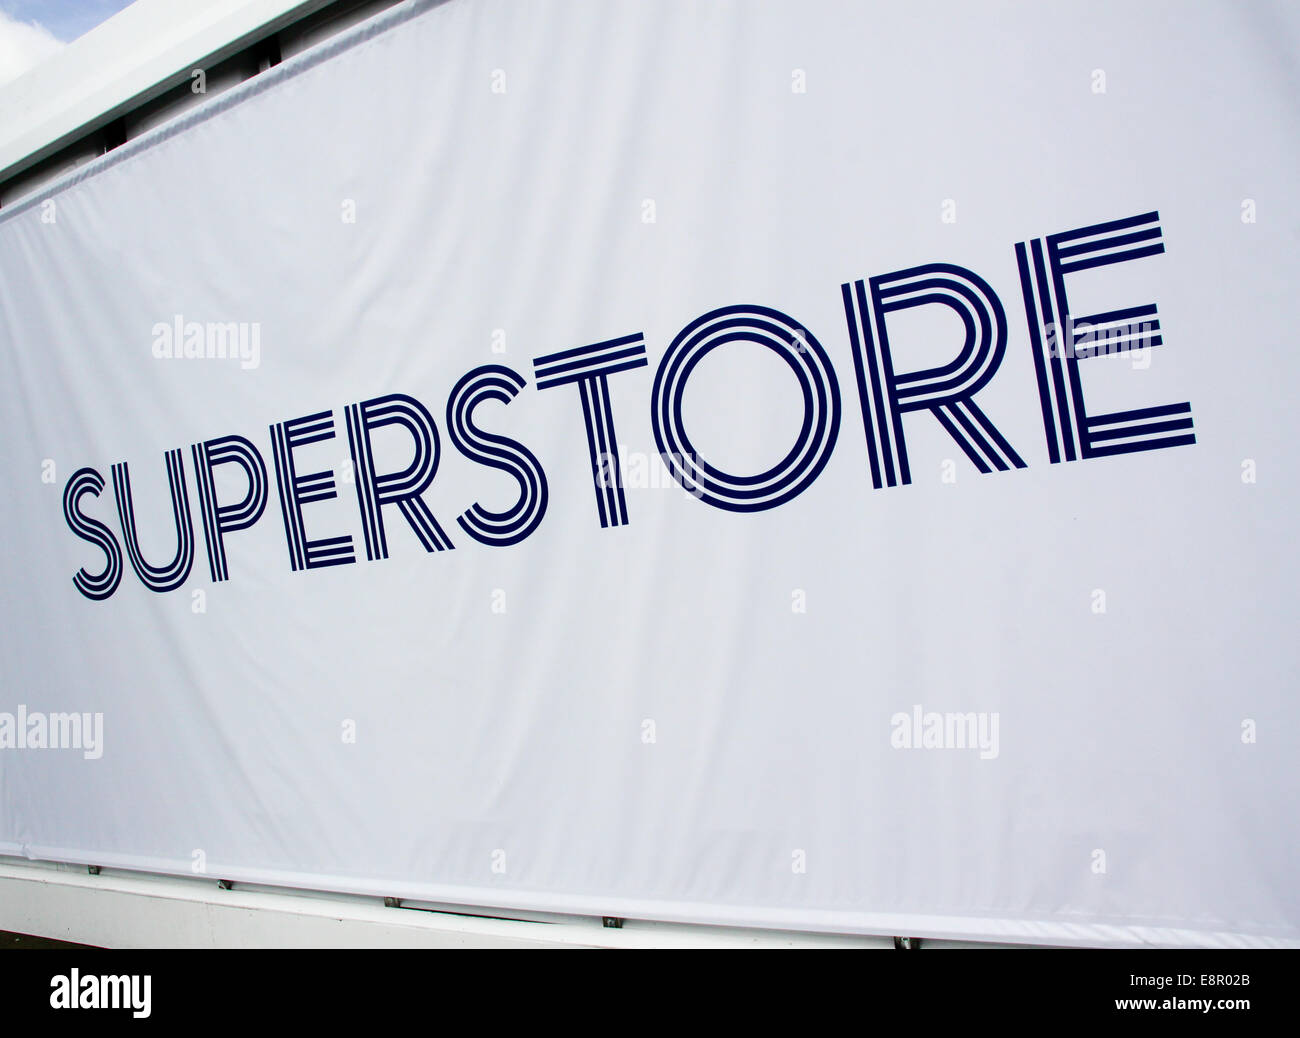 Superstore sign on side of marquee Stock Photo